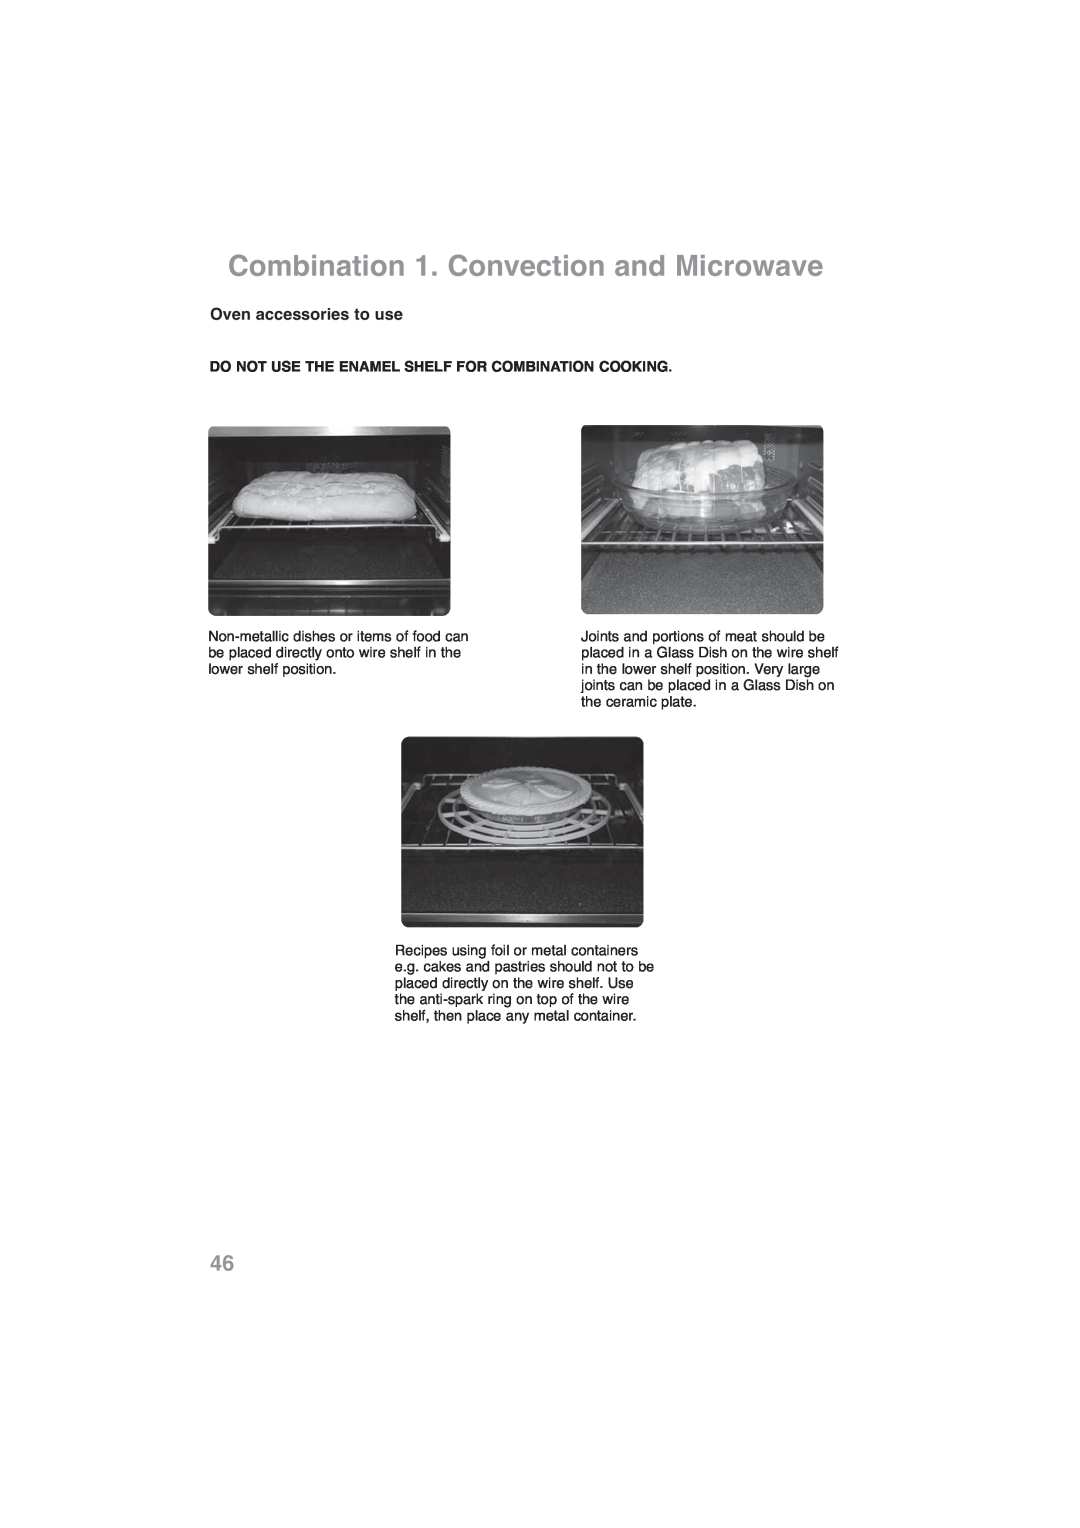 Panasonic NN-CF768M, NN-CF778S operating instructions Combination 1. Convection and Microwave, Oven accessories to use 